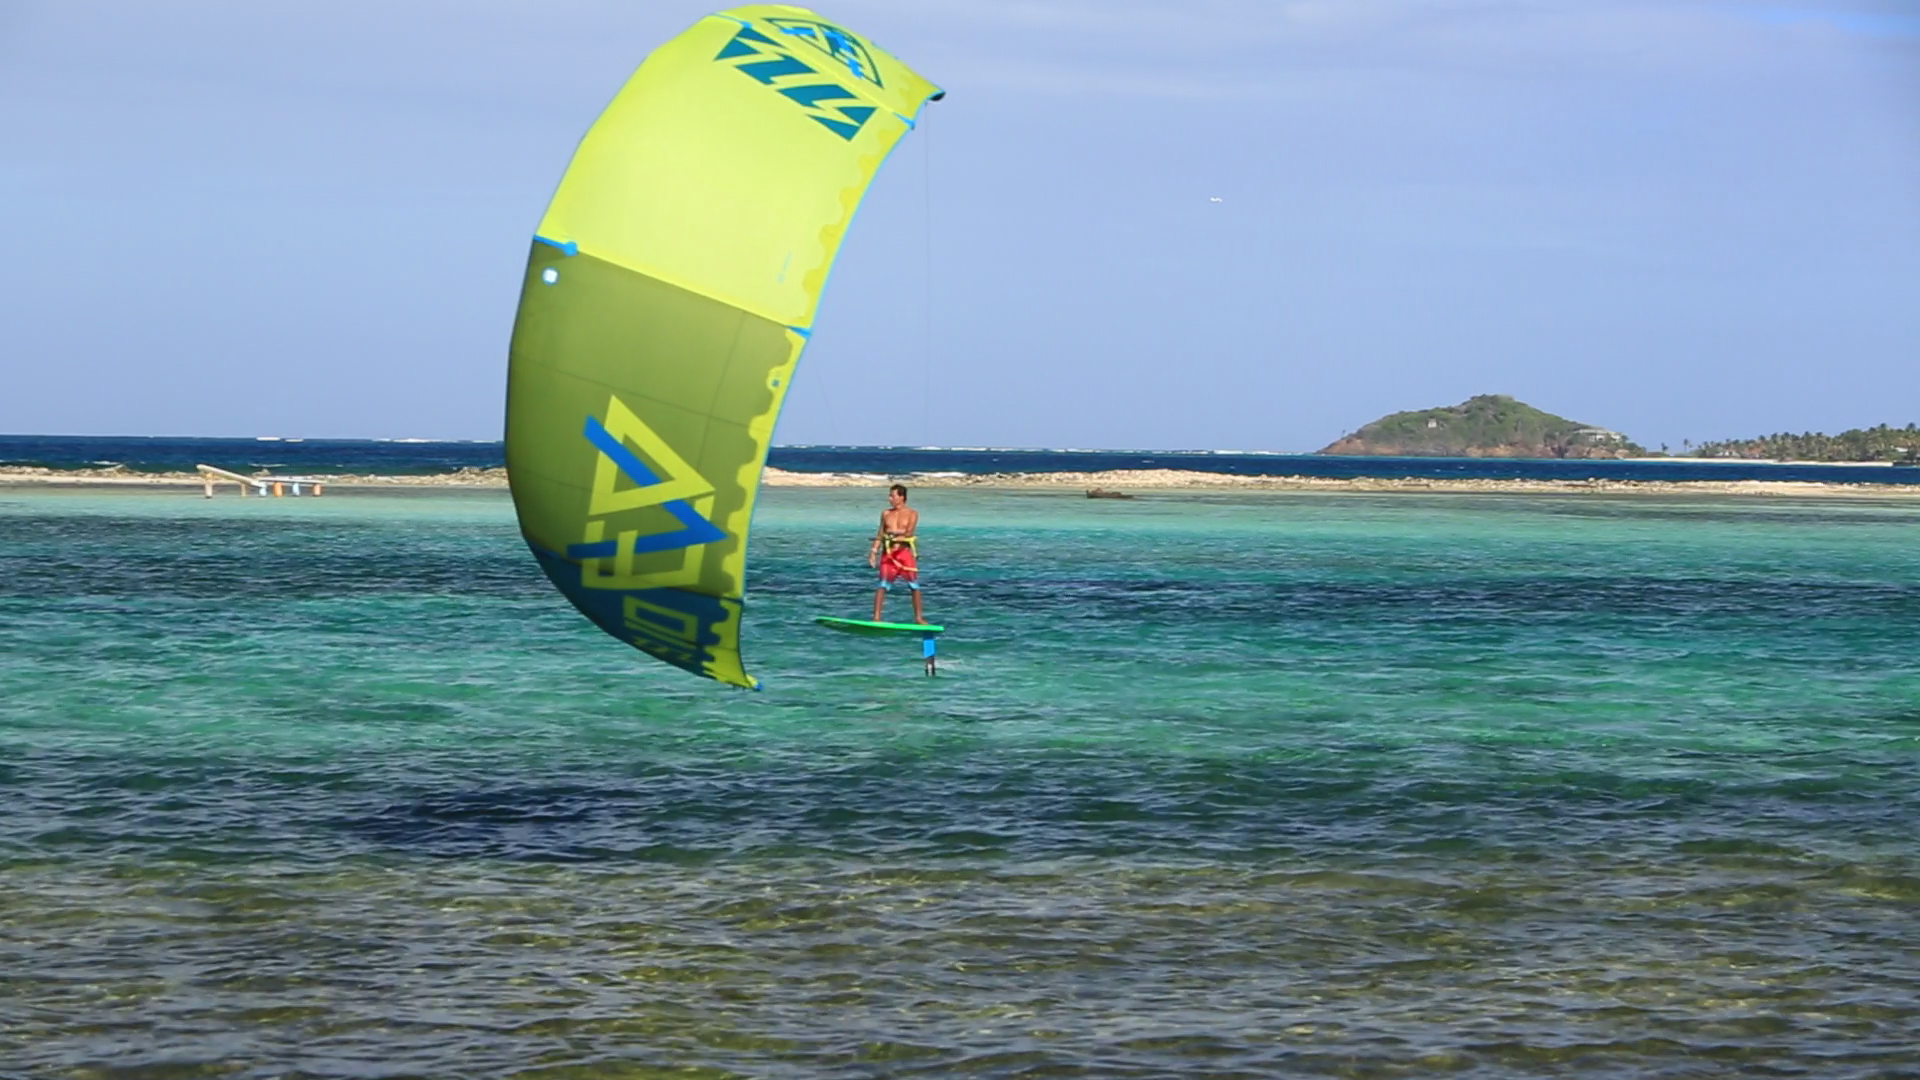 The 8 Stages of Kite Foiling by Jeremie Tronet